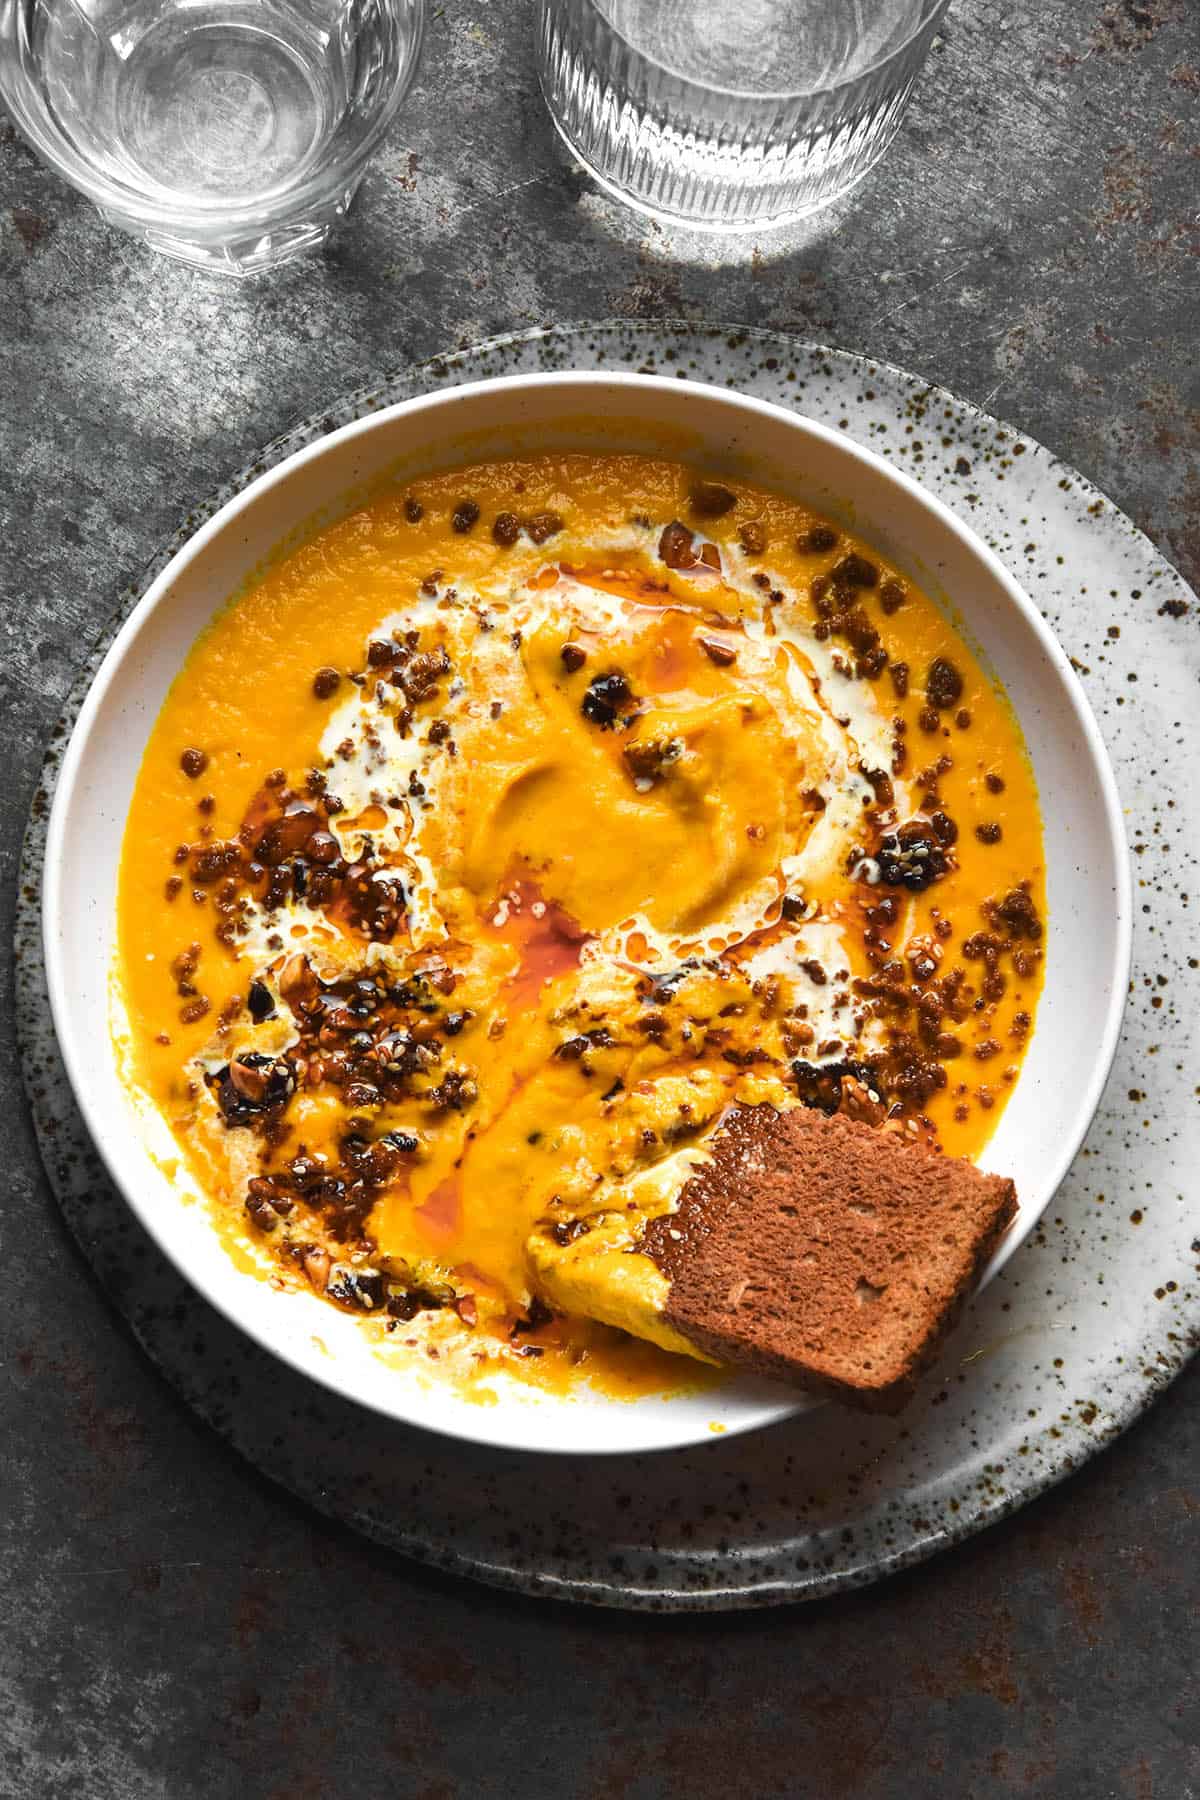 An aerial image of a white bowl filled with low FODMAP carrot soup topped with chilli crisp and cream and served with toast. The bowl sits on a white speckled ceramic plate atop a dark steel backdrop.